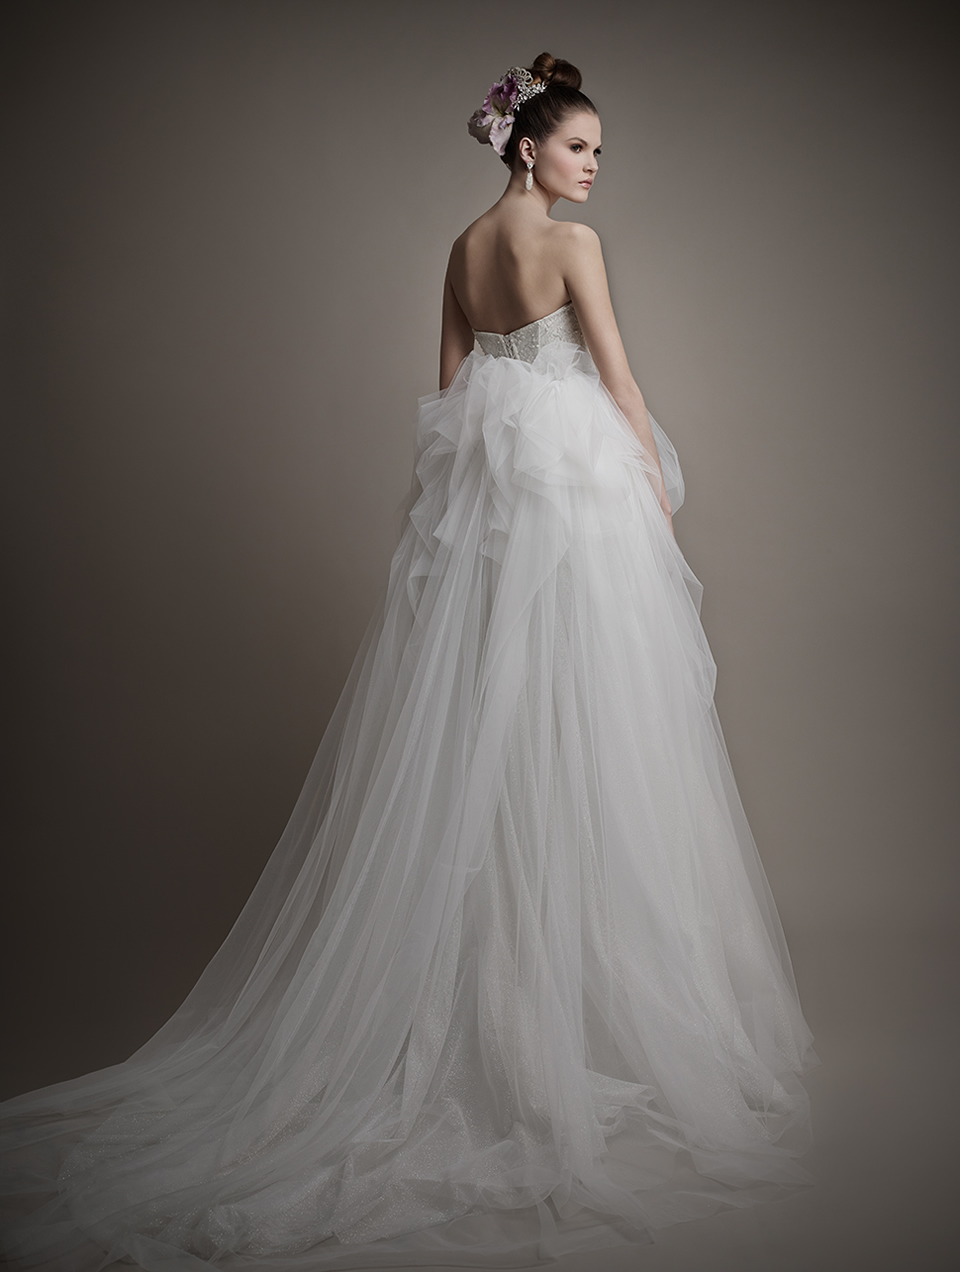 Tulle Skirted Wedding Dress Laura Teresa from Ersa Atelier's 2015 Collection